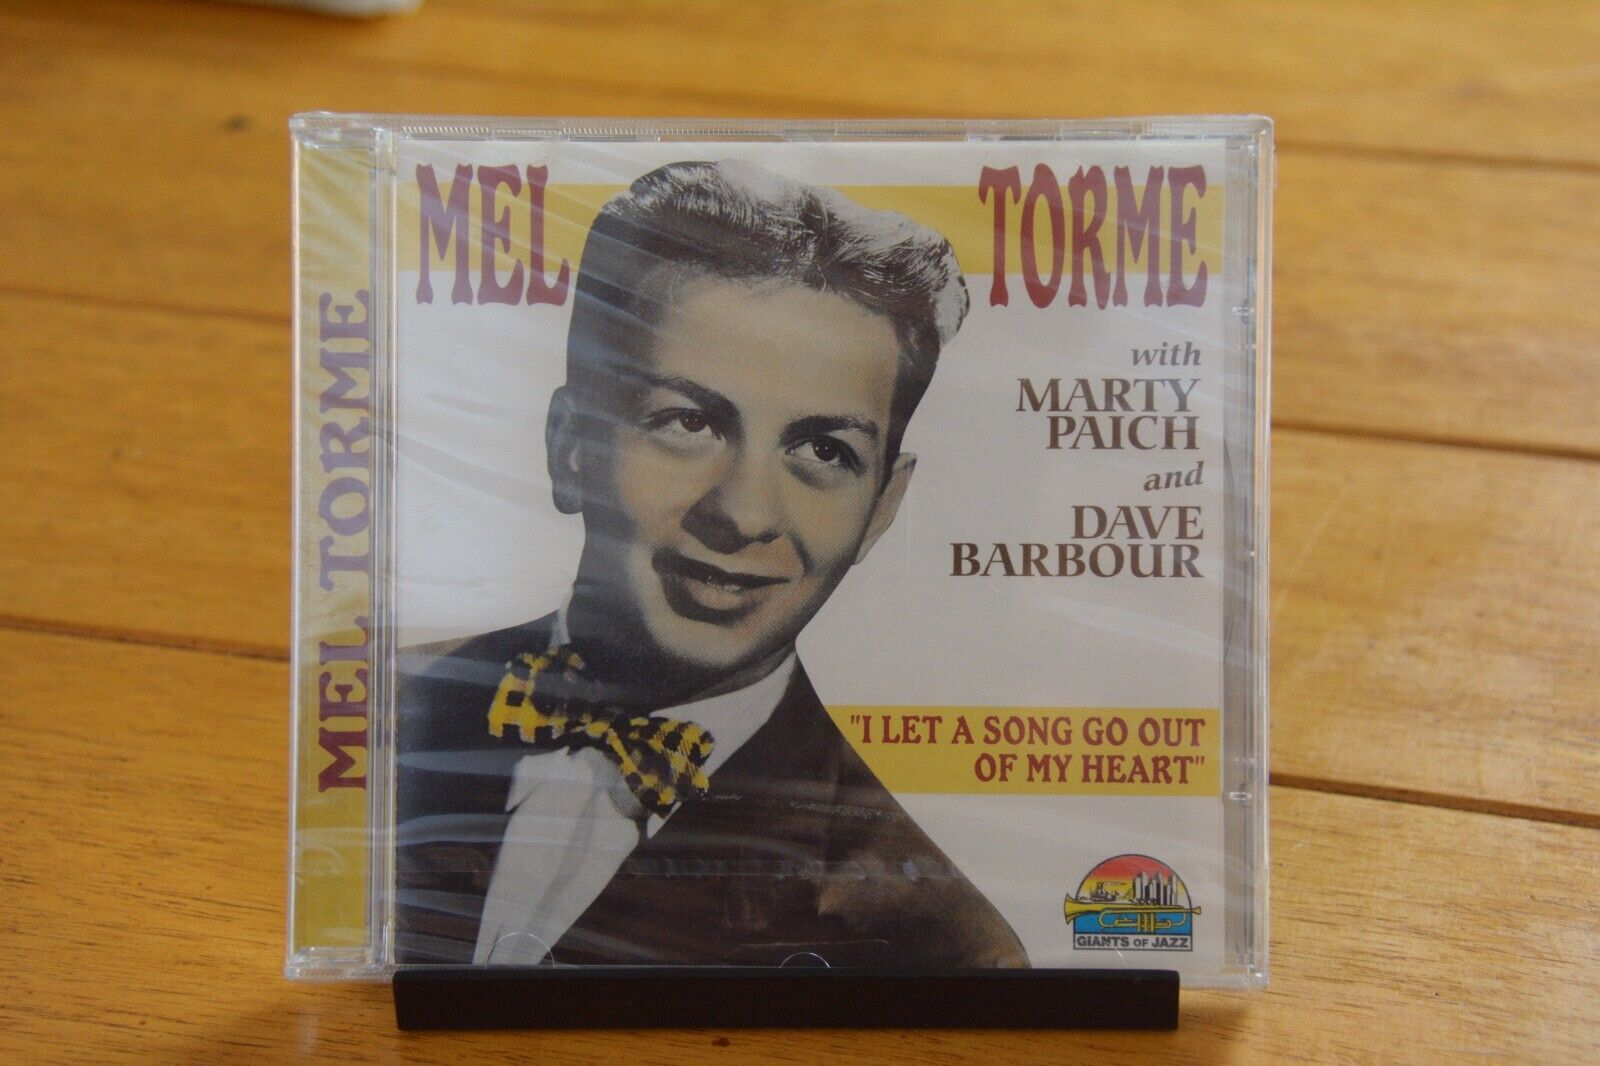 MEL TORME CD "I LET A SONG GO OUT OF MY HEART" [NEW SEALED] GIANTS OF JAZZ [141]